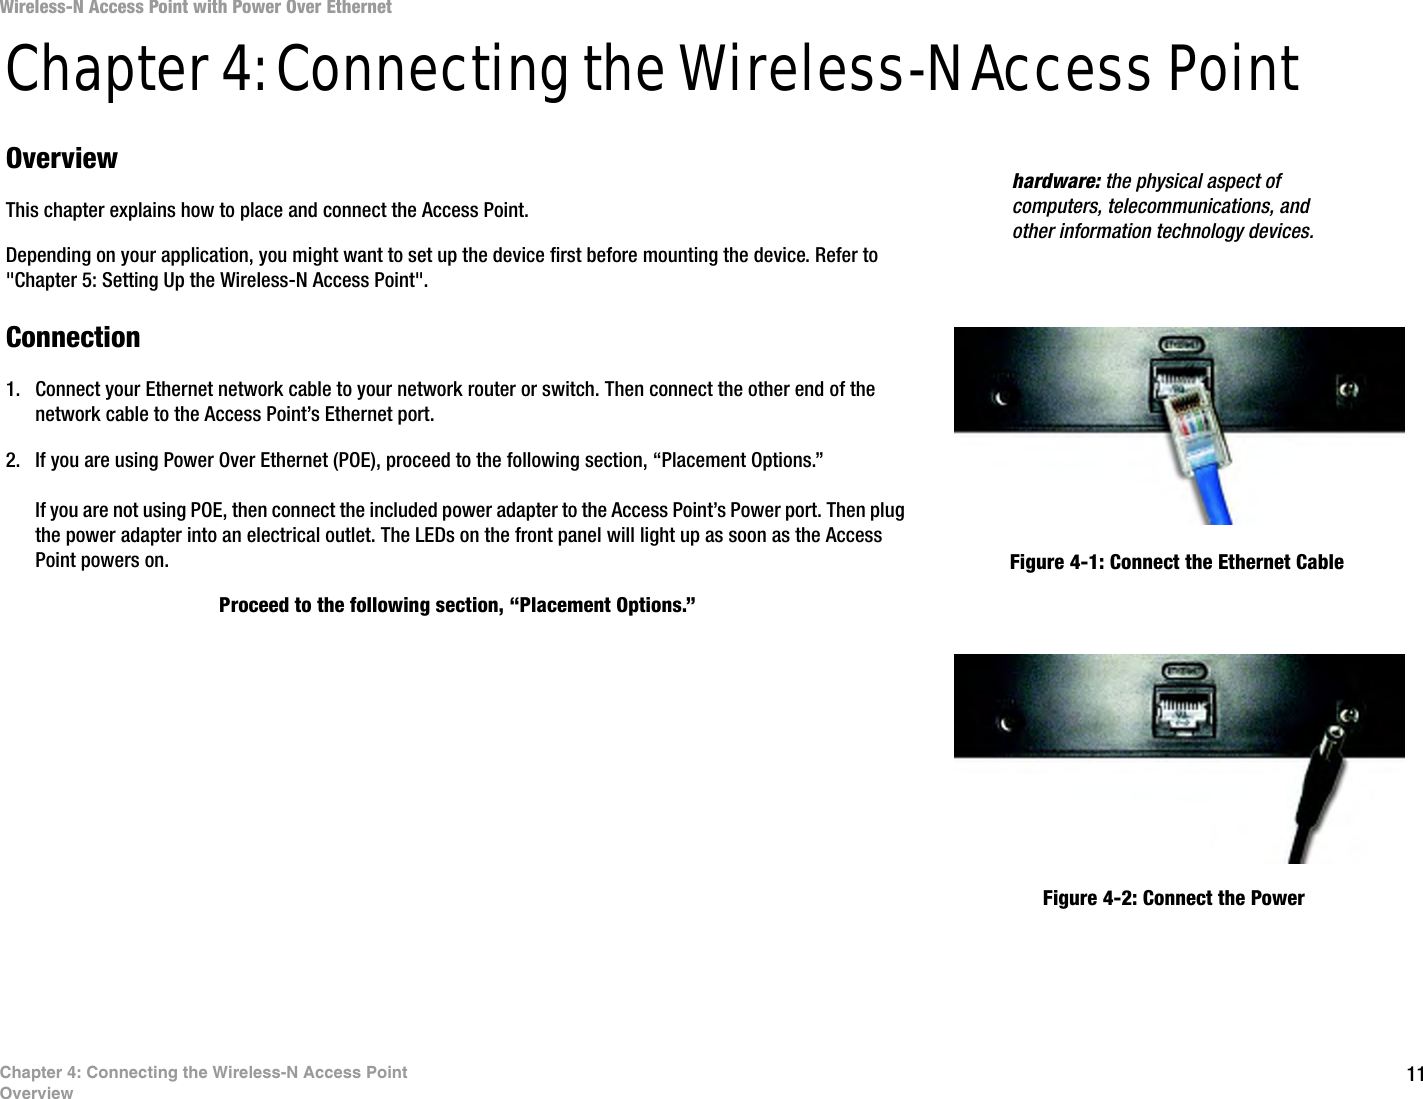 11Chapter 4: Connecting the Wireless-N Access PointOverviewWireless-N Access Point with Power Over EthernetChapter 4: Connecting the Wireless-N Access PointOverviewThis chapter explains how to place and connect the Access Point. Depending on your application, you might want to set up the device first before mounting the device. Refer to &quot;Chapter 5: Setting Up the Wireless-N Access Point&quot;.Connection1. Connect your Ethernet network cable to your network router or switch. Then connect the other end of the network cable to the Access Point’s Ethernet port.2. If you are using Power Over Ethernet (POE), proceed to the following section, “Placement Options.”If you are not using POE, then connect the included power adapter to the Access Point’s Power port. Then plug the power adapter into an electrical outlet. The LEDs on the front panel will light up as soon as the Access Point powers on.Proceed to the following section, “Placement Options.”hardware: the physical aspect of computers, telecommunications, and other information technology devices.Figure 4-1: Connect the Ethernet CableFigure 4-2: Connect the Power